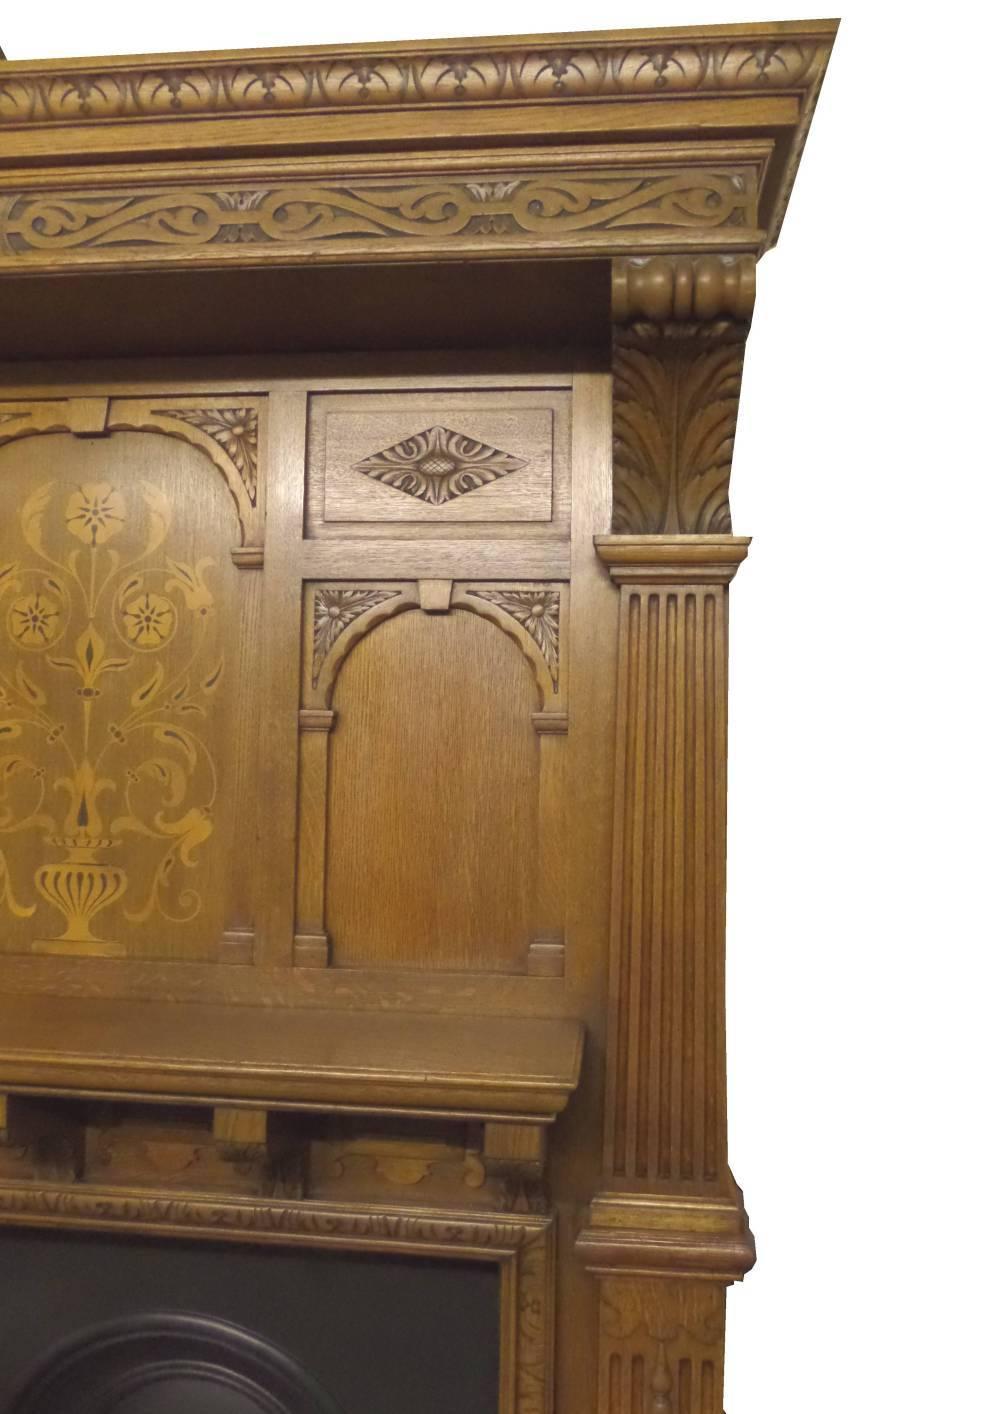 Antique restored late Victorian large oak surround. A large oak surround from a Victorian property in London England. Beautiful inlay panel work and wood carving. Fluted grand pillars with leafed carving under the shelf and around opening, circa